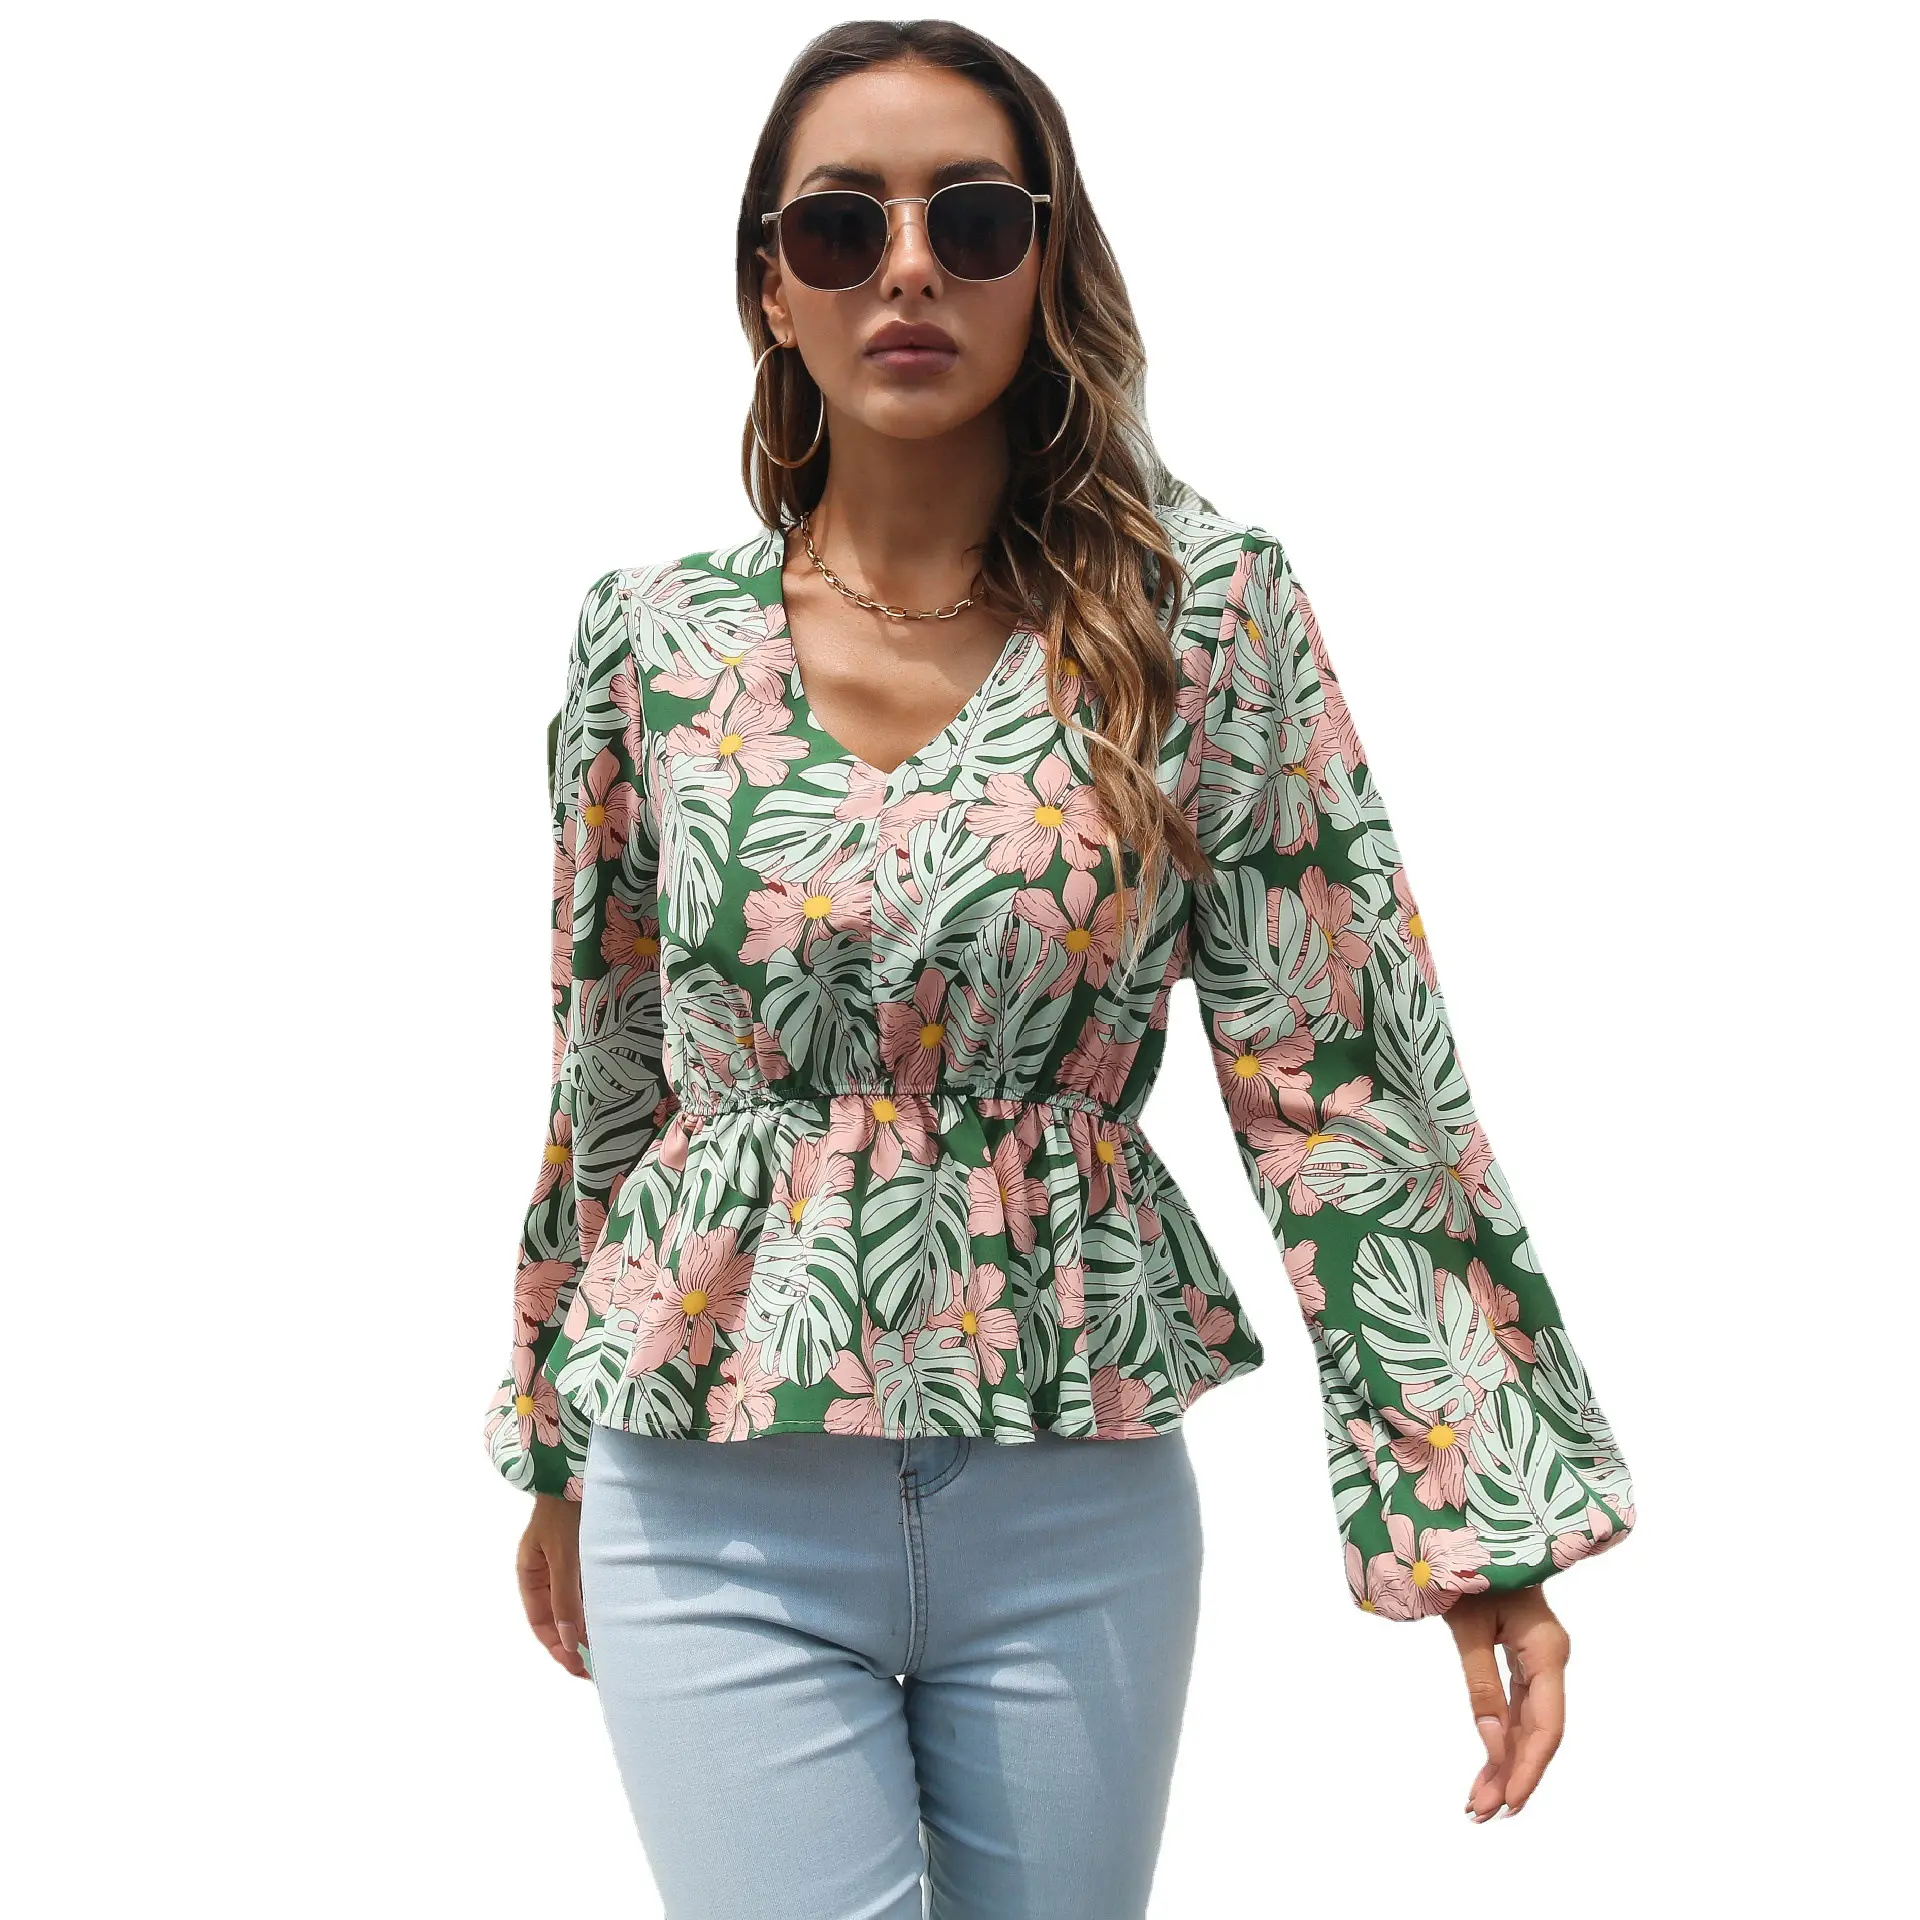 V-neck Closed Waist Plaid Floral Print Lantern Sleeve Top Small Shirt Spring And Autumn New Sexy Women's Blouses & Shirts